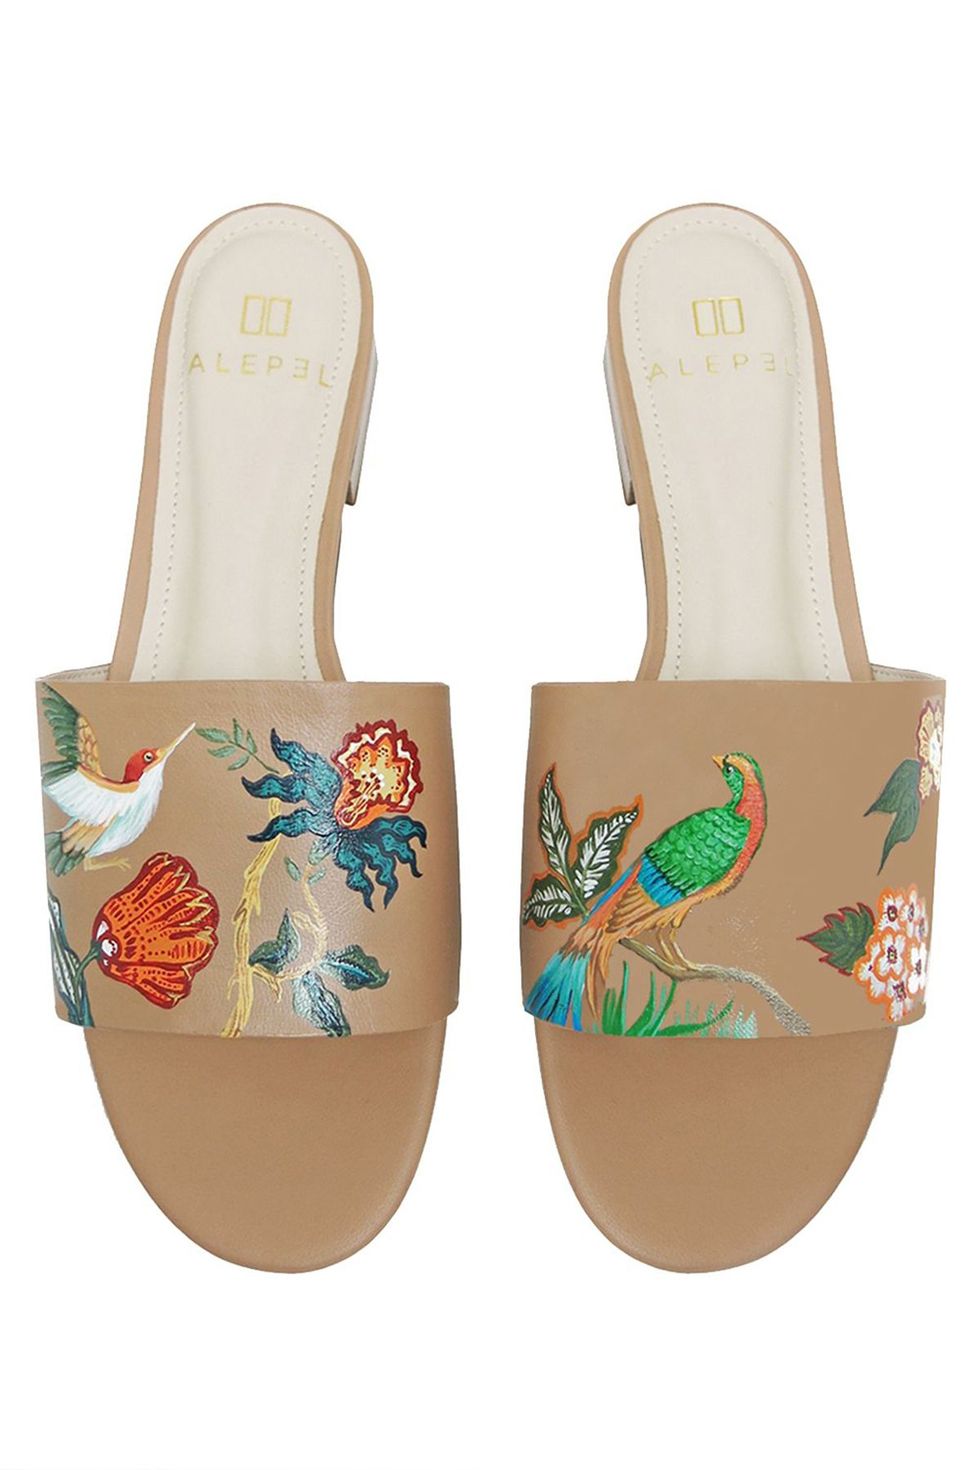 Bird Floral Hand Painted Slide in Tan